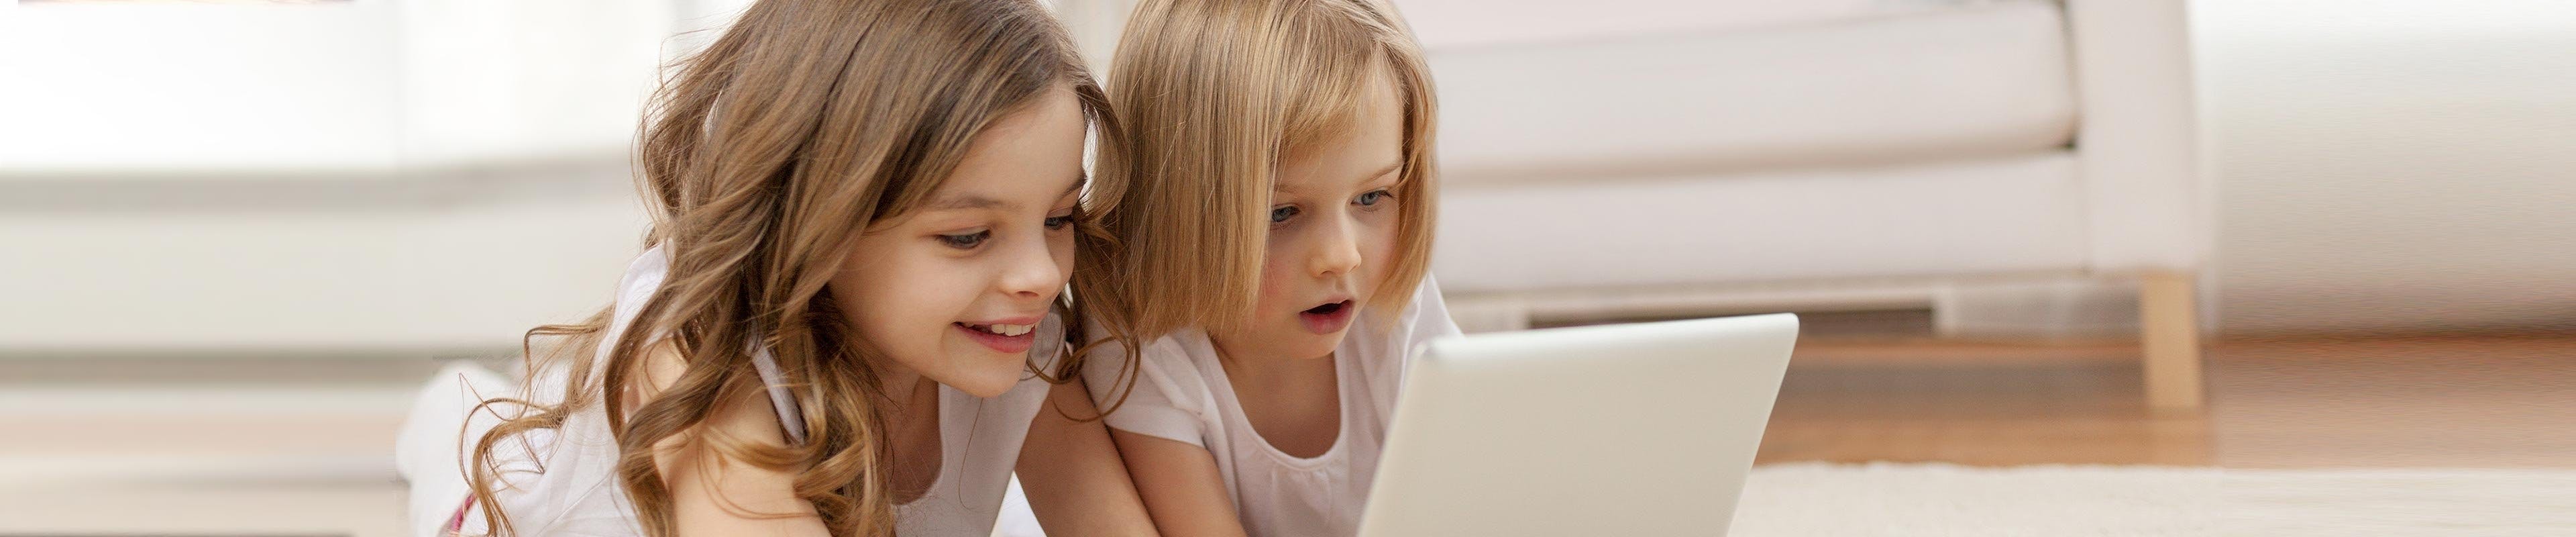 Image of two sisters looking at a tablet while playing in the living room.